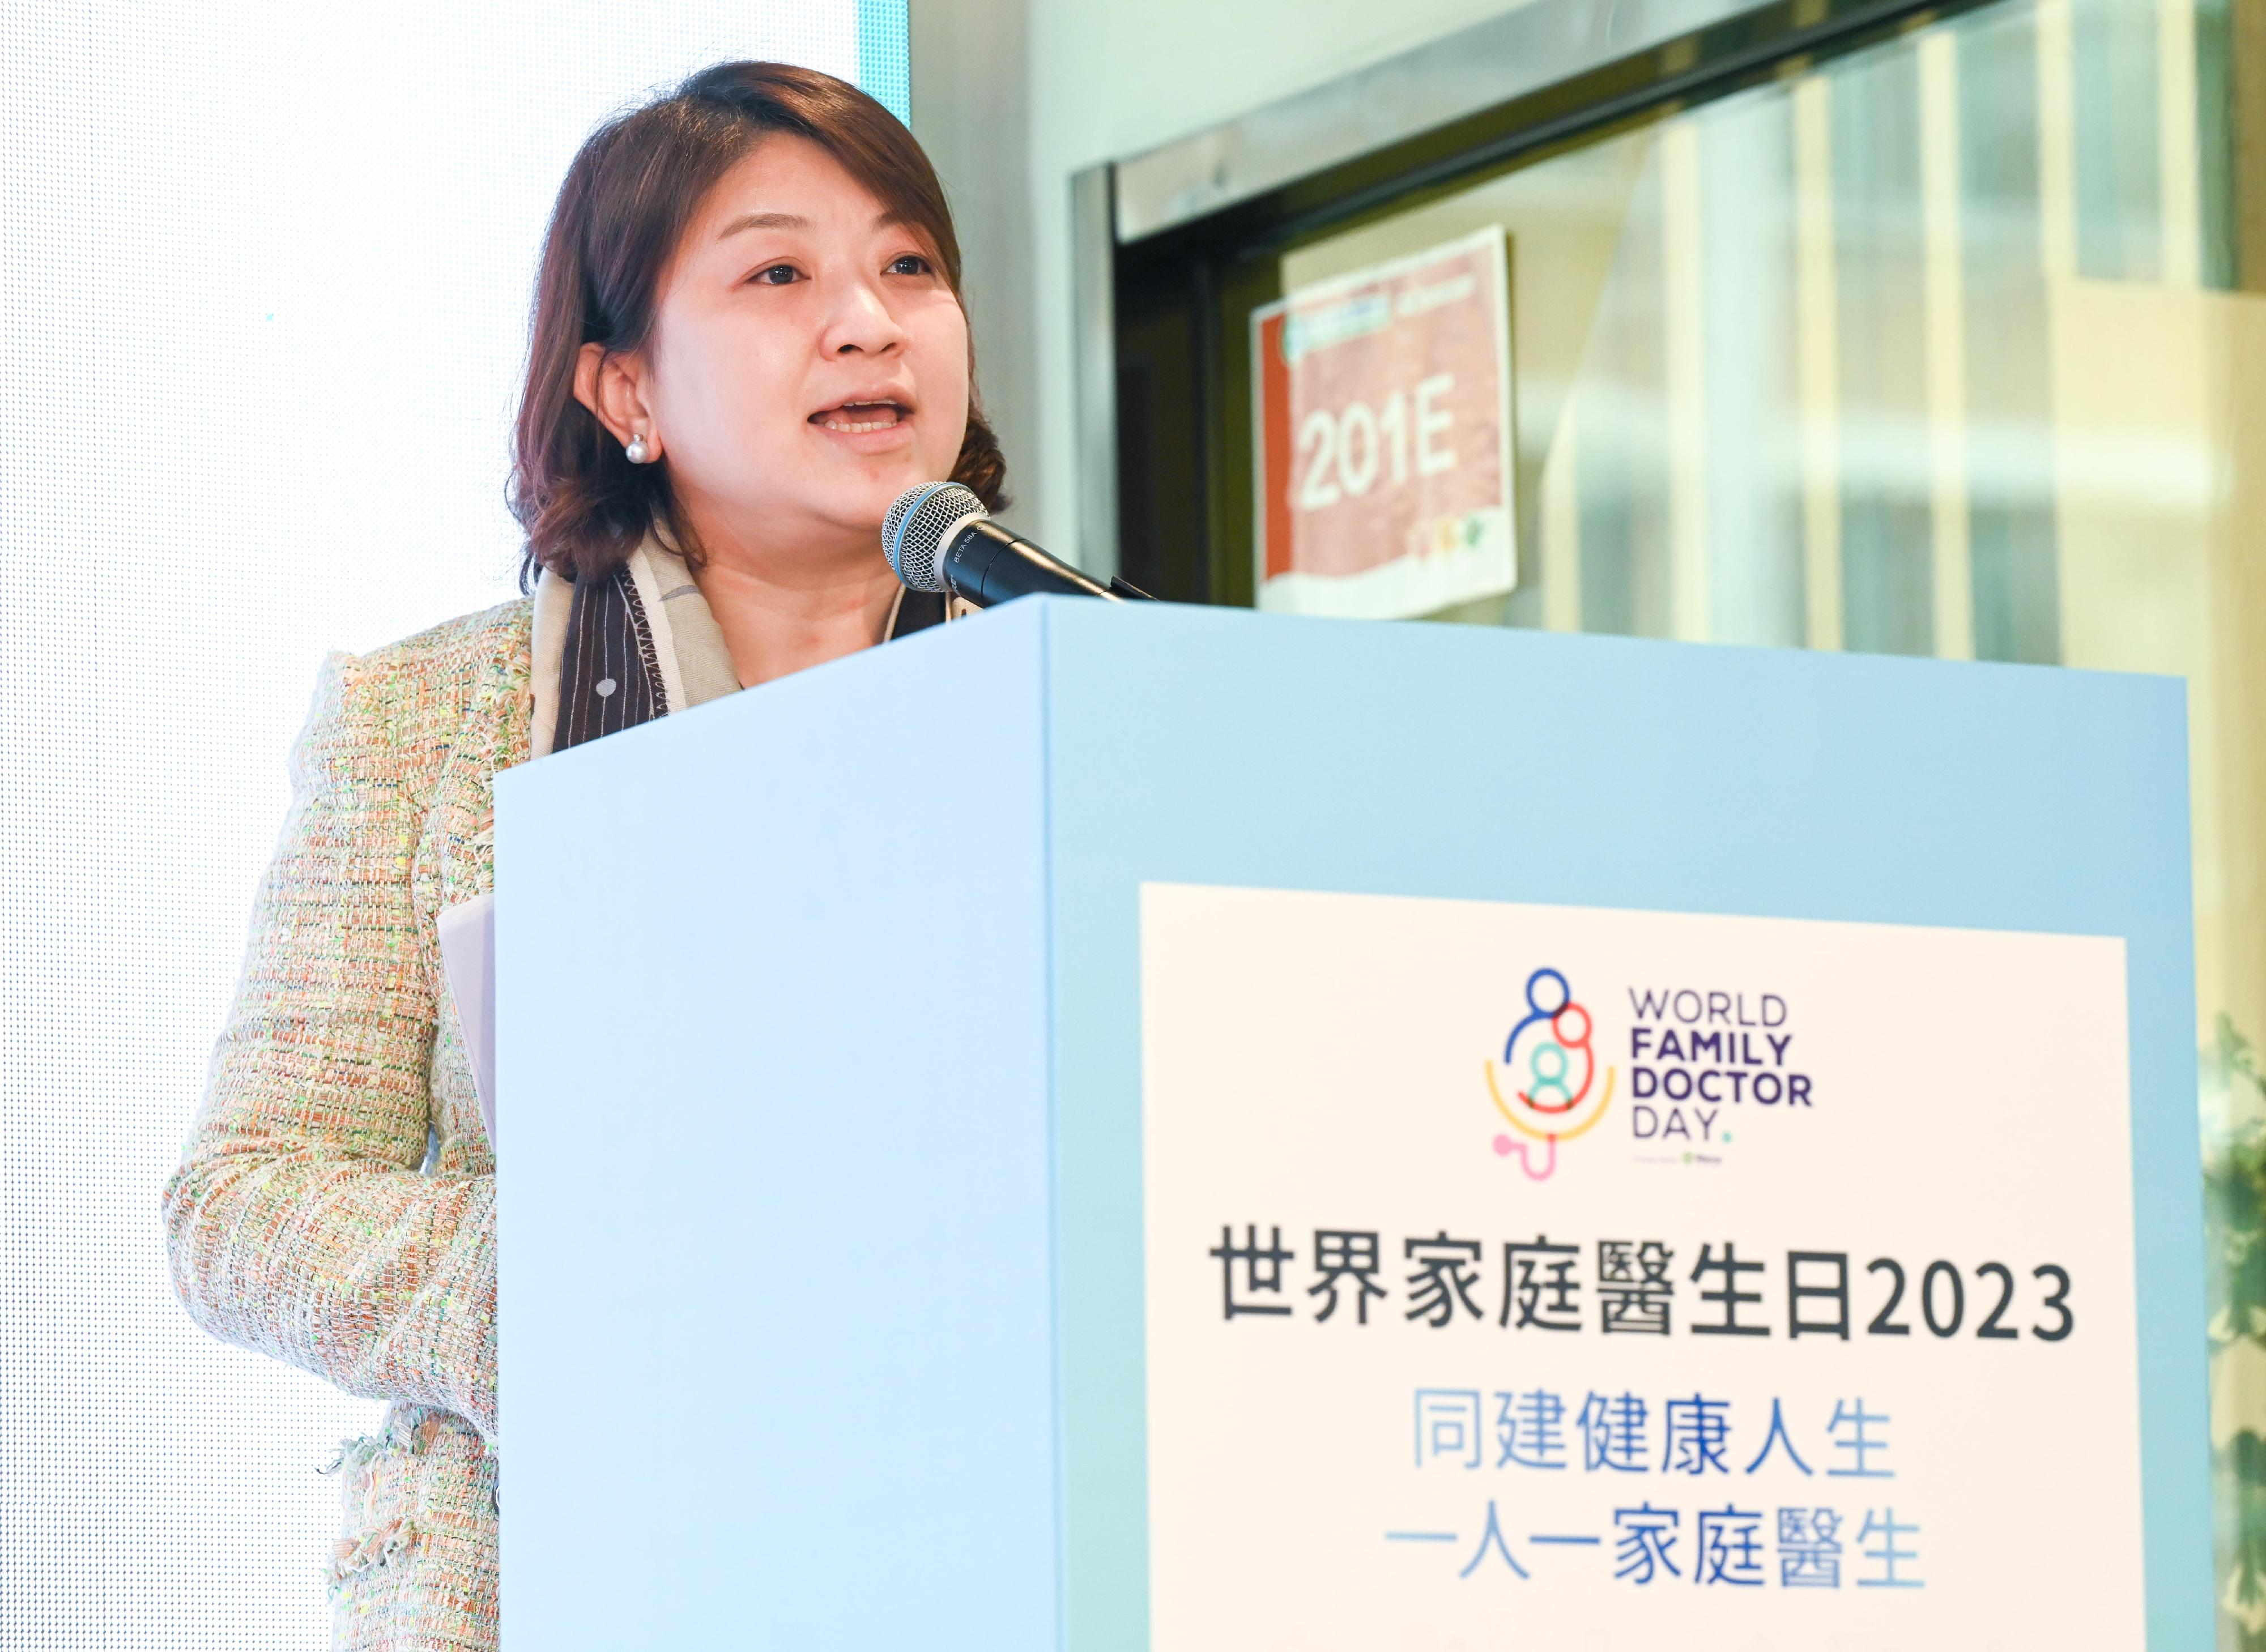 The Under Secretary for Health, Dr Libby Lee, calls on more doctors to enrol as family doctors and partake in the work of primary healthcare at the Family Doctor Promotion Day event today (May 19).